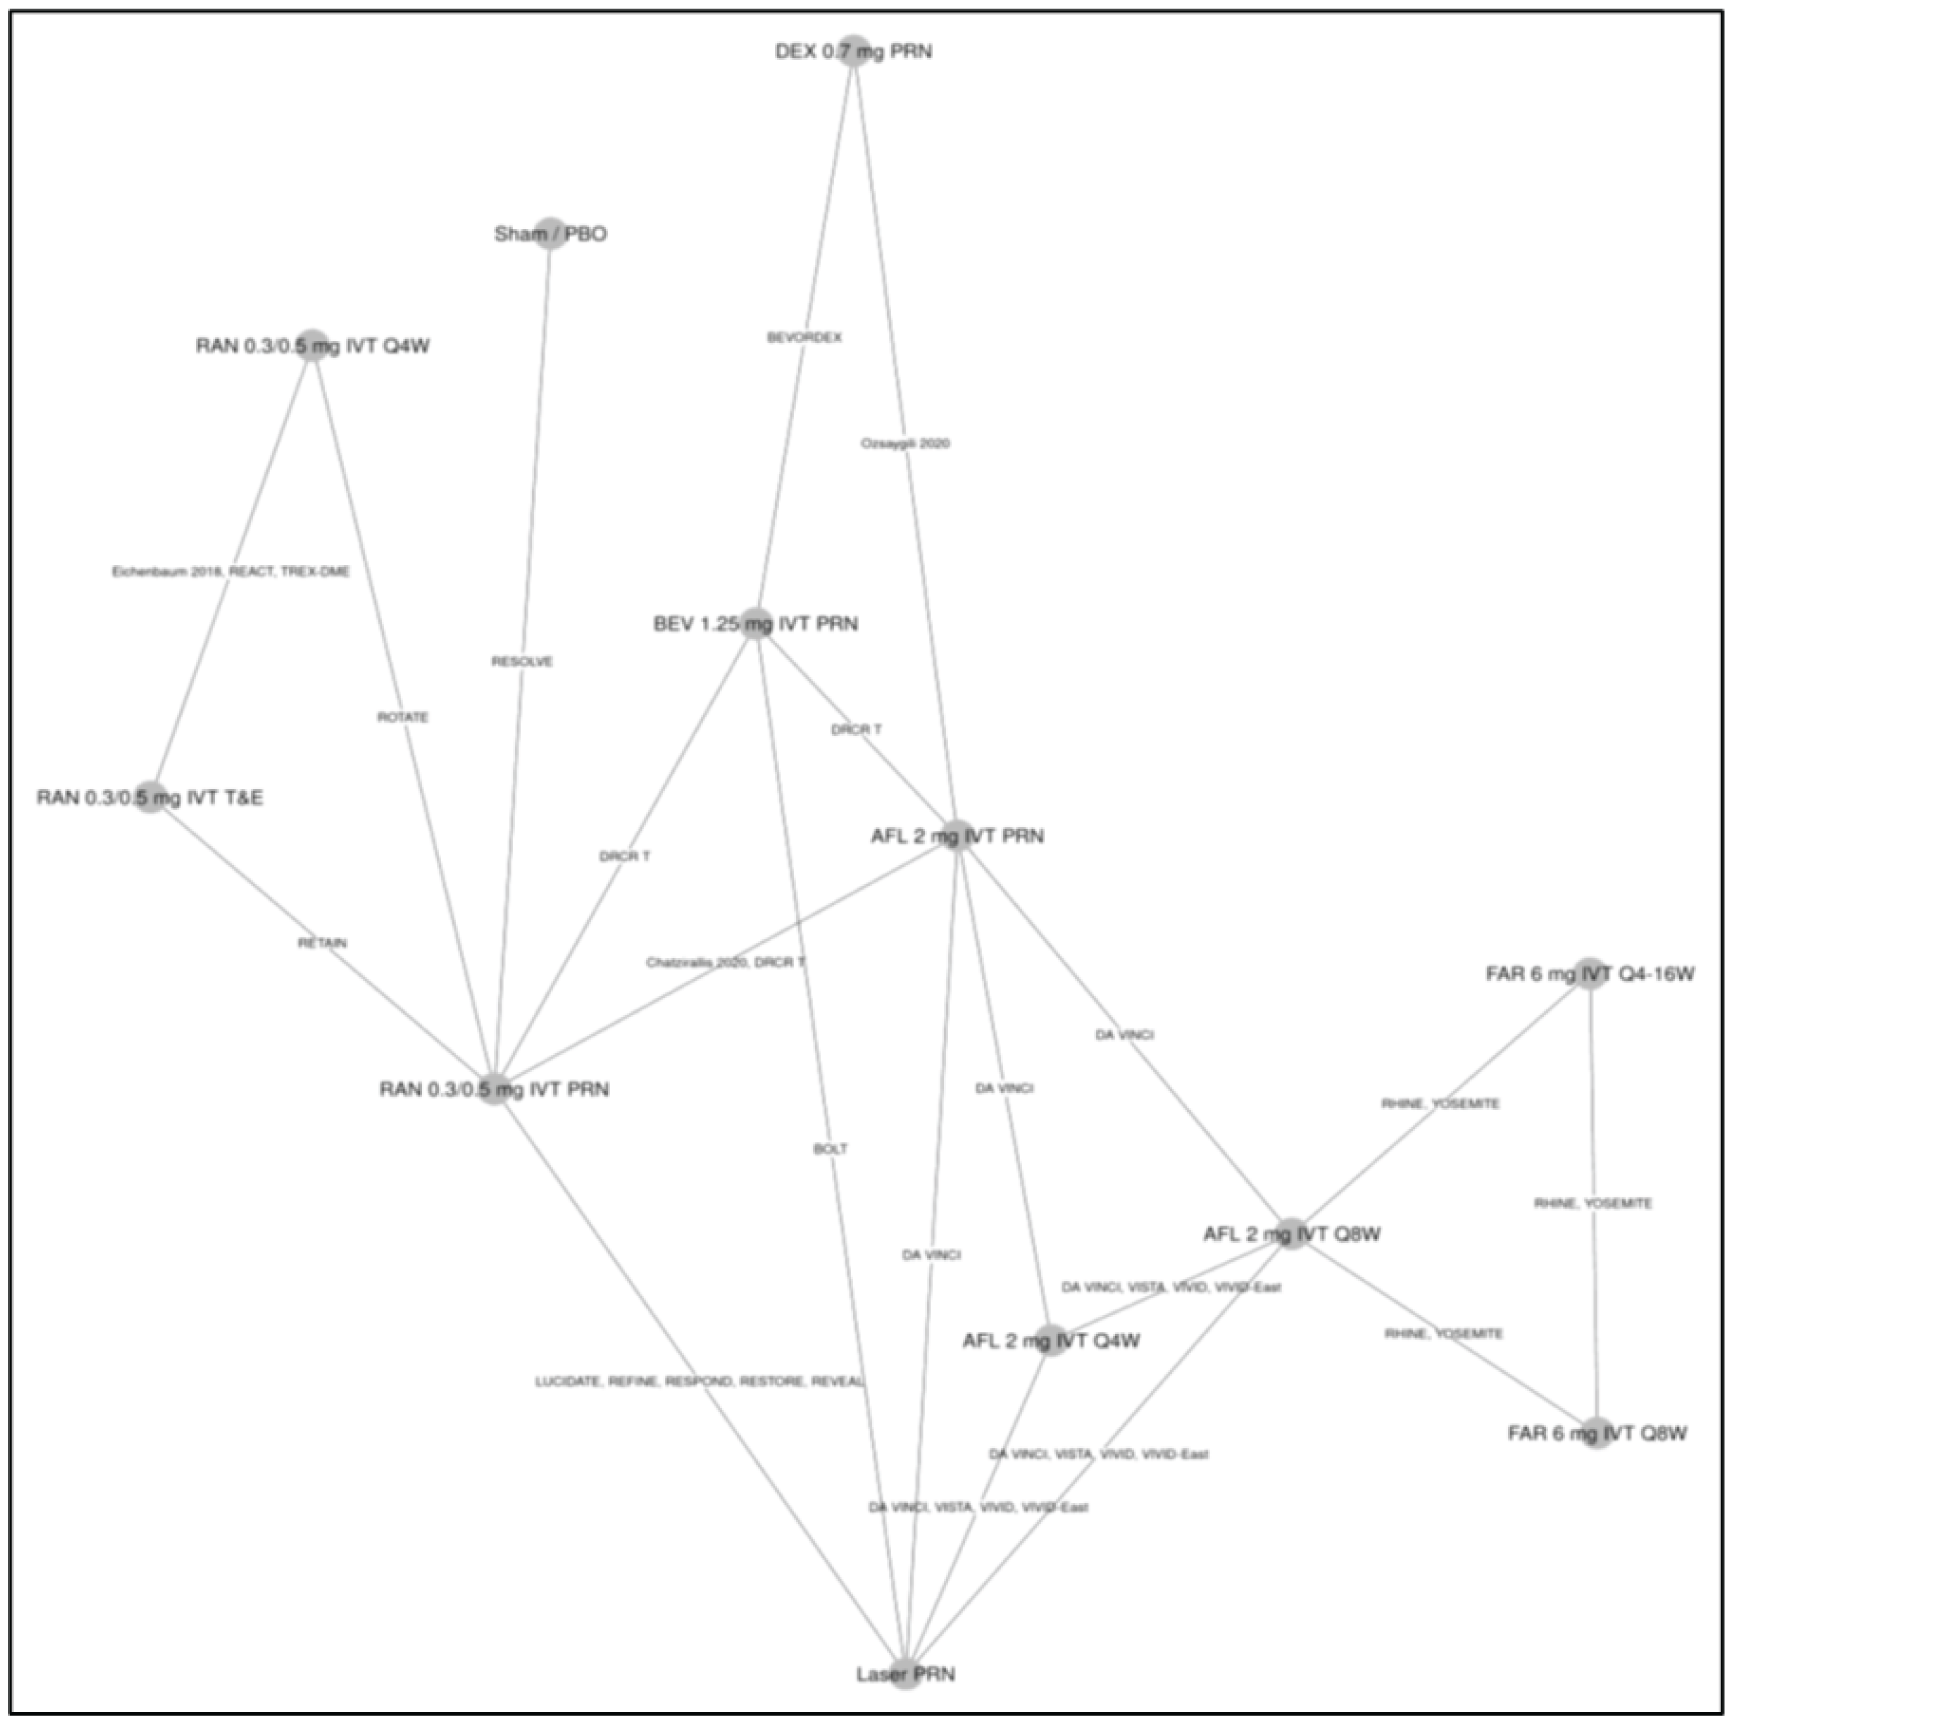 Twenty-two trials reported on the mean change in BCVA at 12 months and were connected in a network. There are 3 connected star diagrams with 5 or more connections: ranibizumab 0.3 mg/0.5 mg IVT PRN; aflibercept 2 mg IVT PRN; and AFL 2 mg IVT q.8.w. The most common connection was ranibizumab 0.3 mg/0.5 mg IVT PRN. Faricimab was connected to aflibercept through the RHINE and YOSEMITE trials.